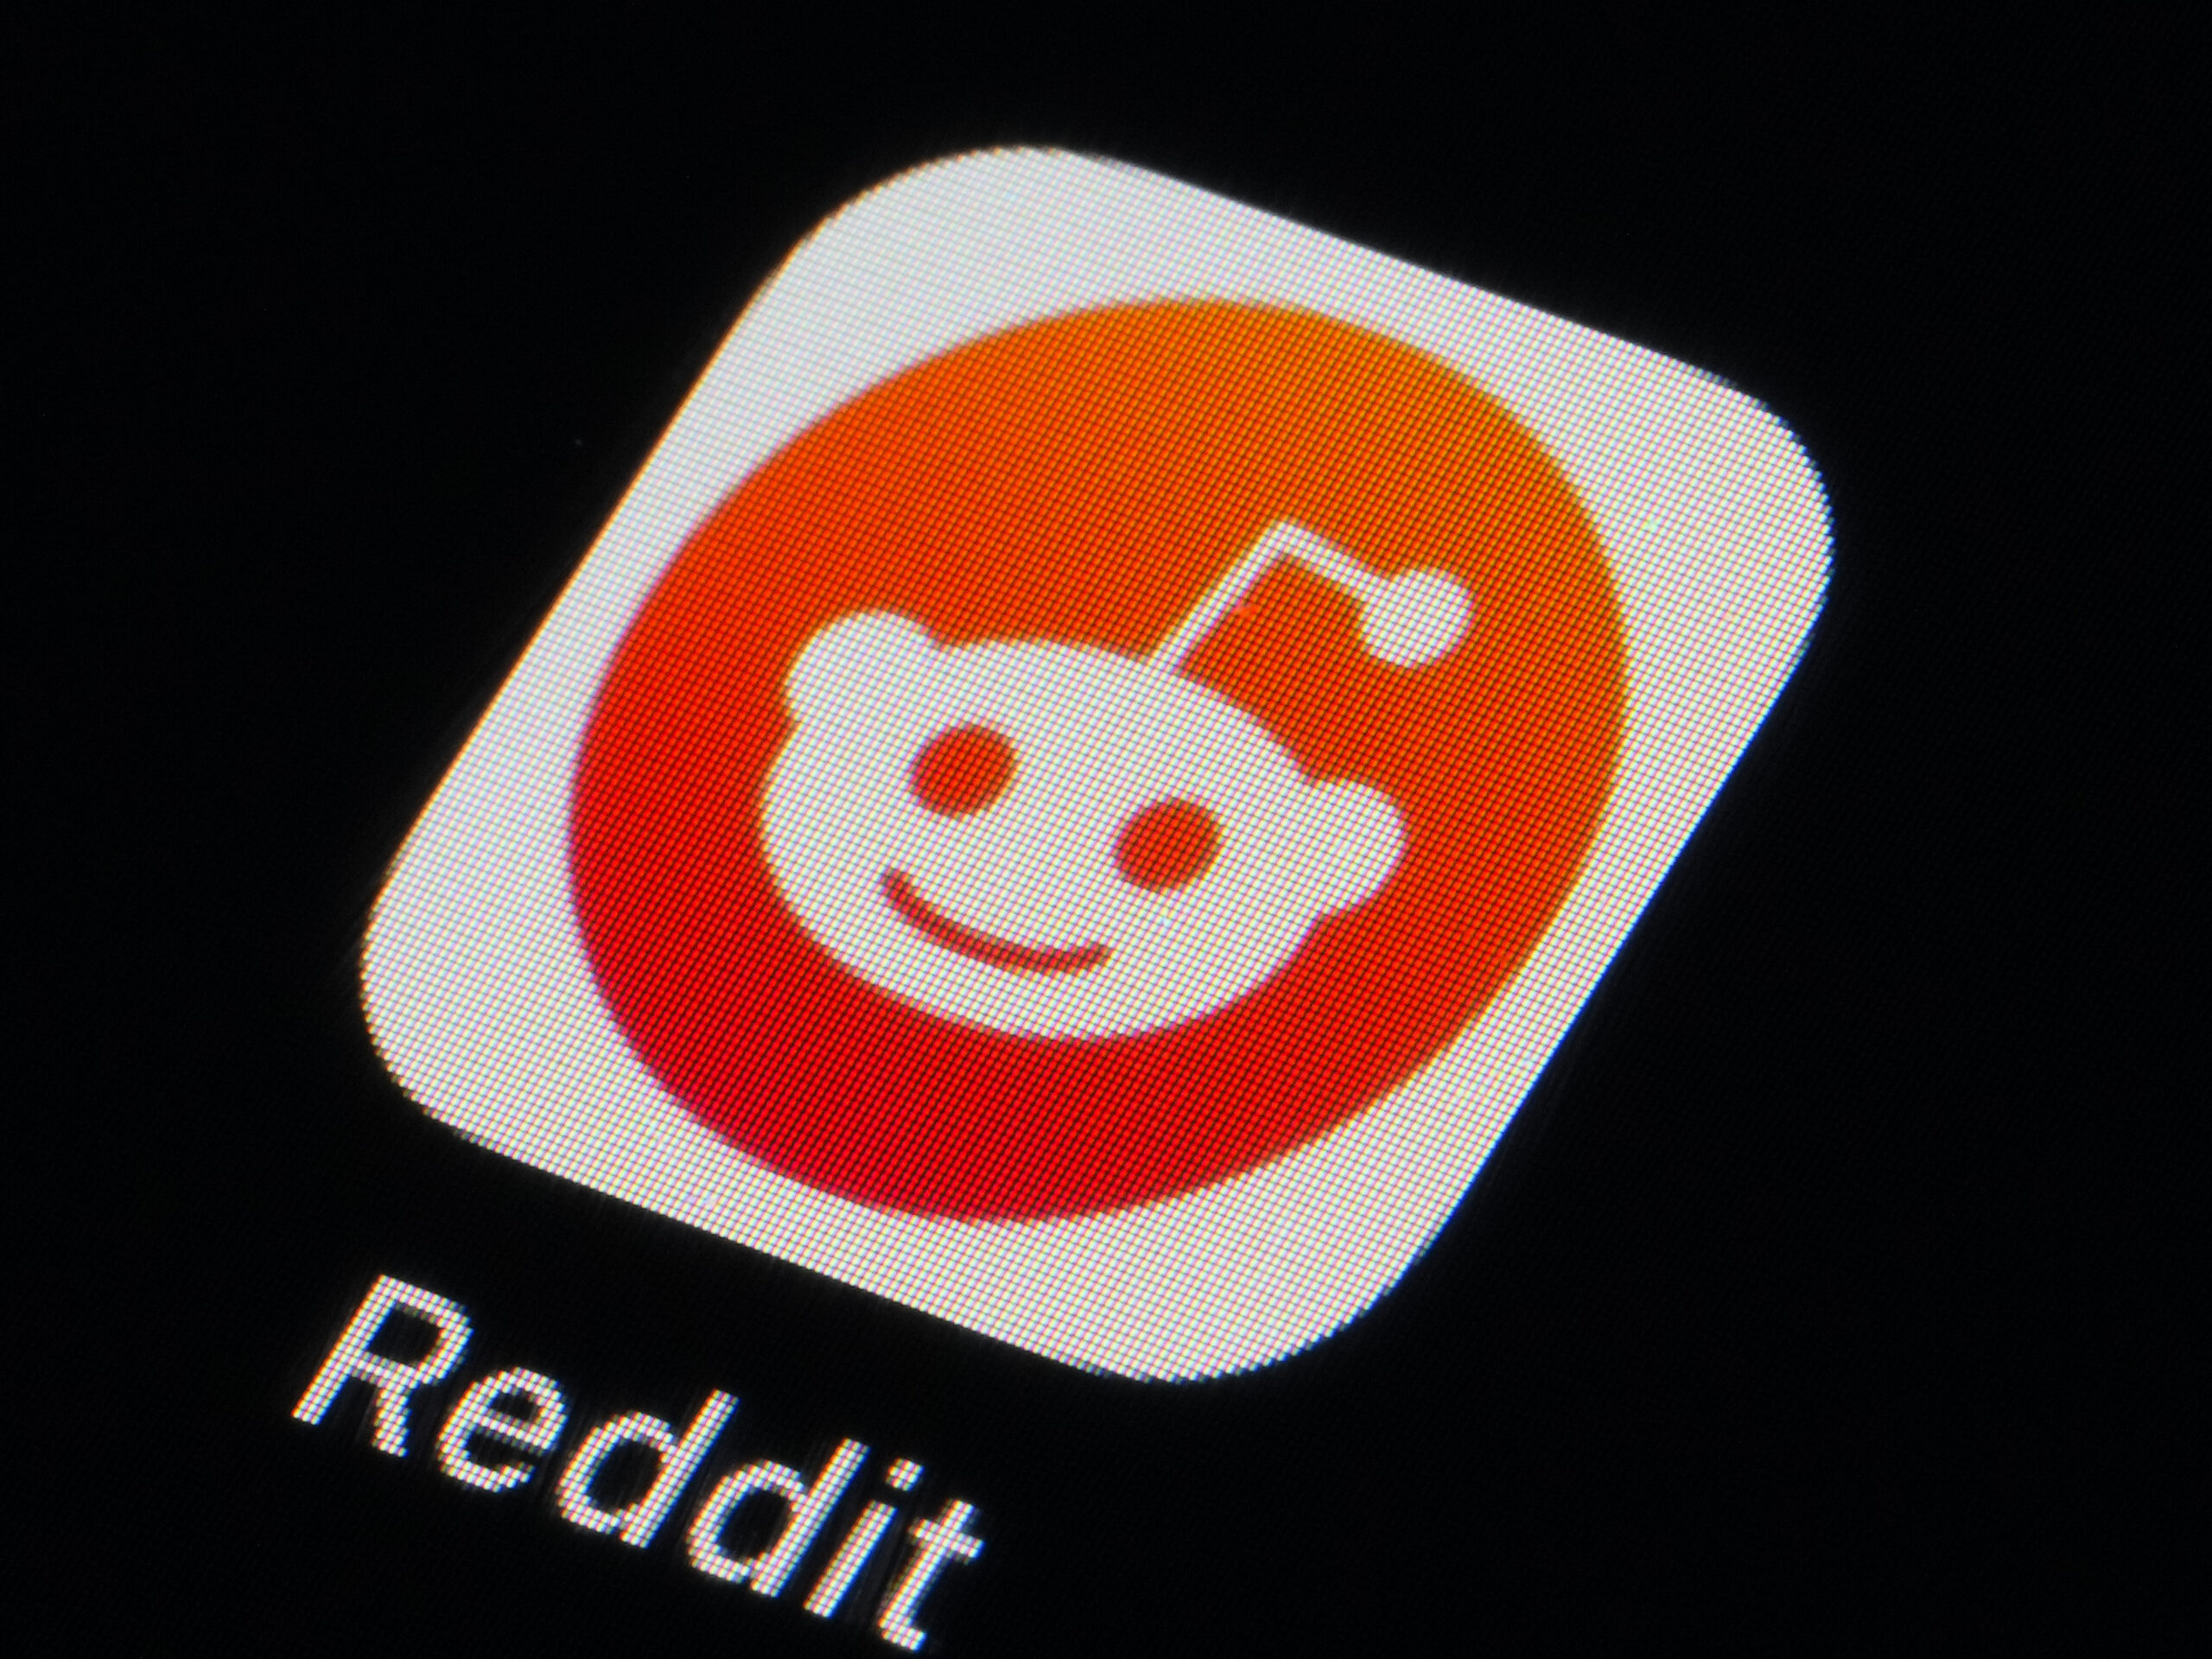 Popular online message board site Reddit is filing to sell stock in an initial public offering, the first social media IPO since 2019.